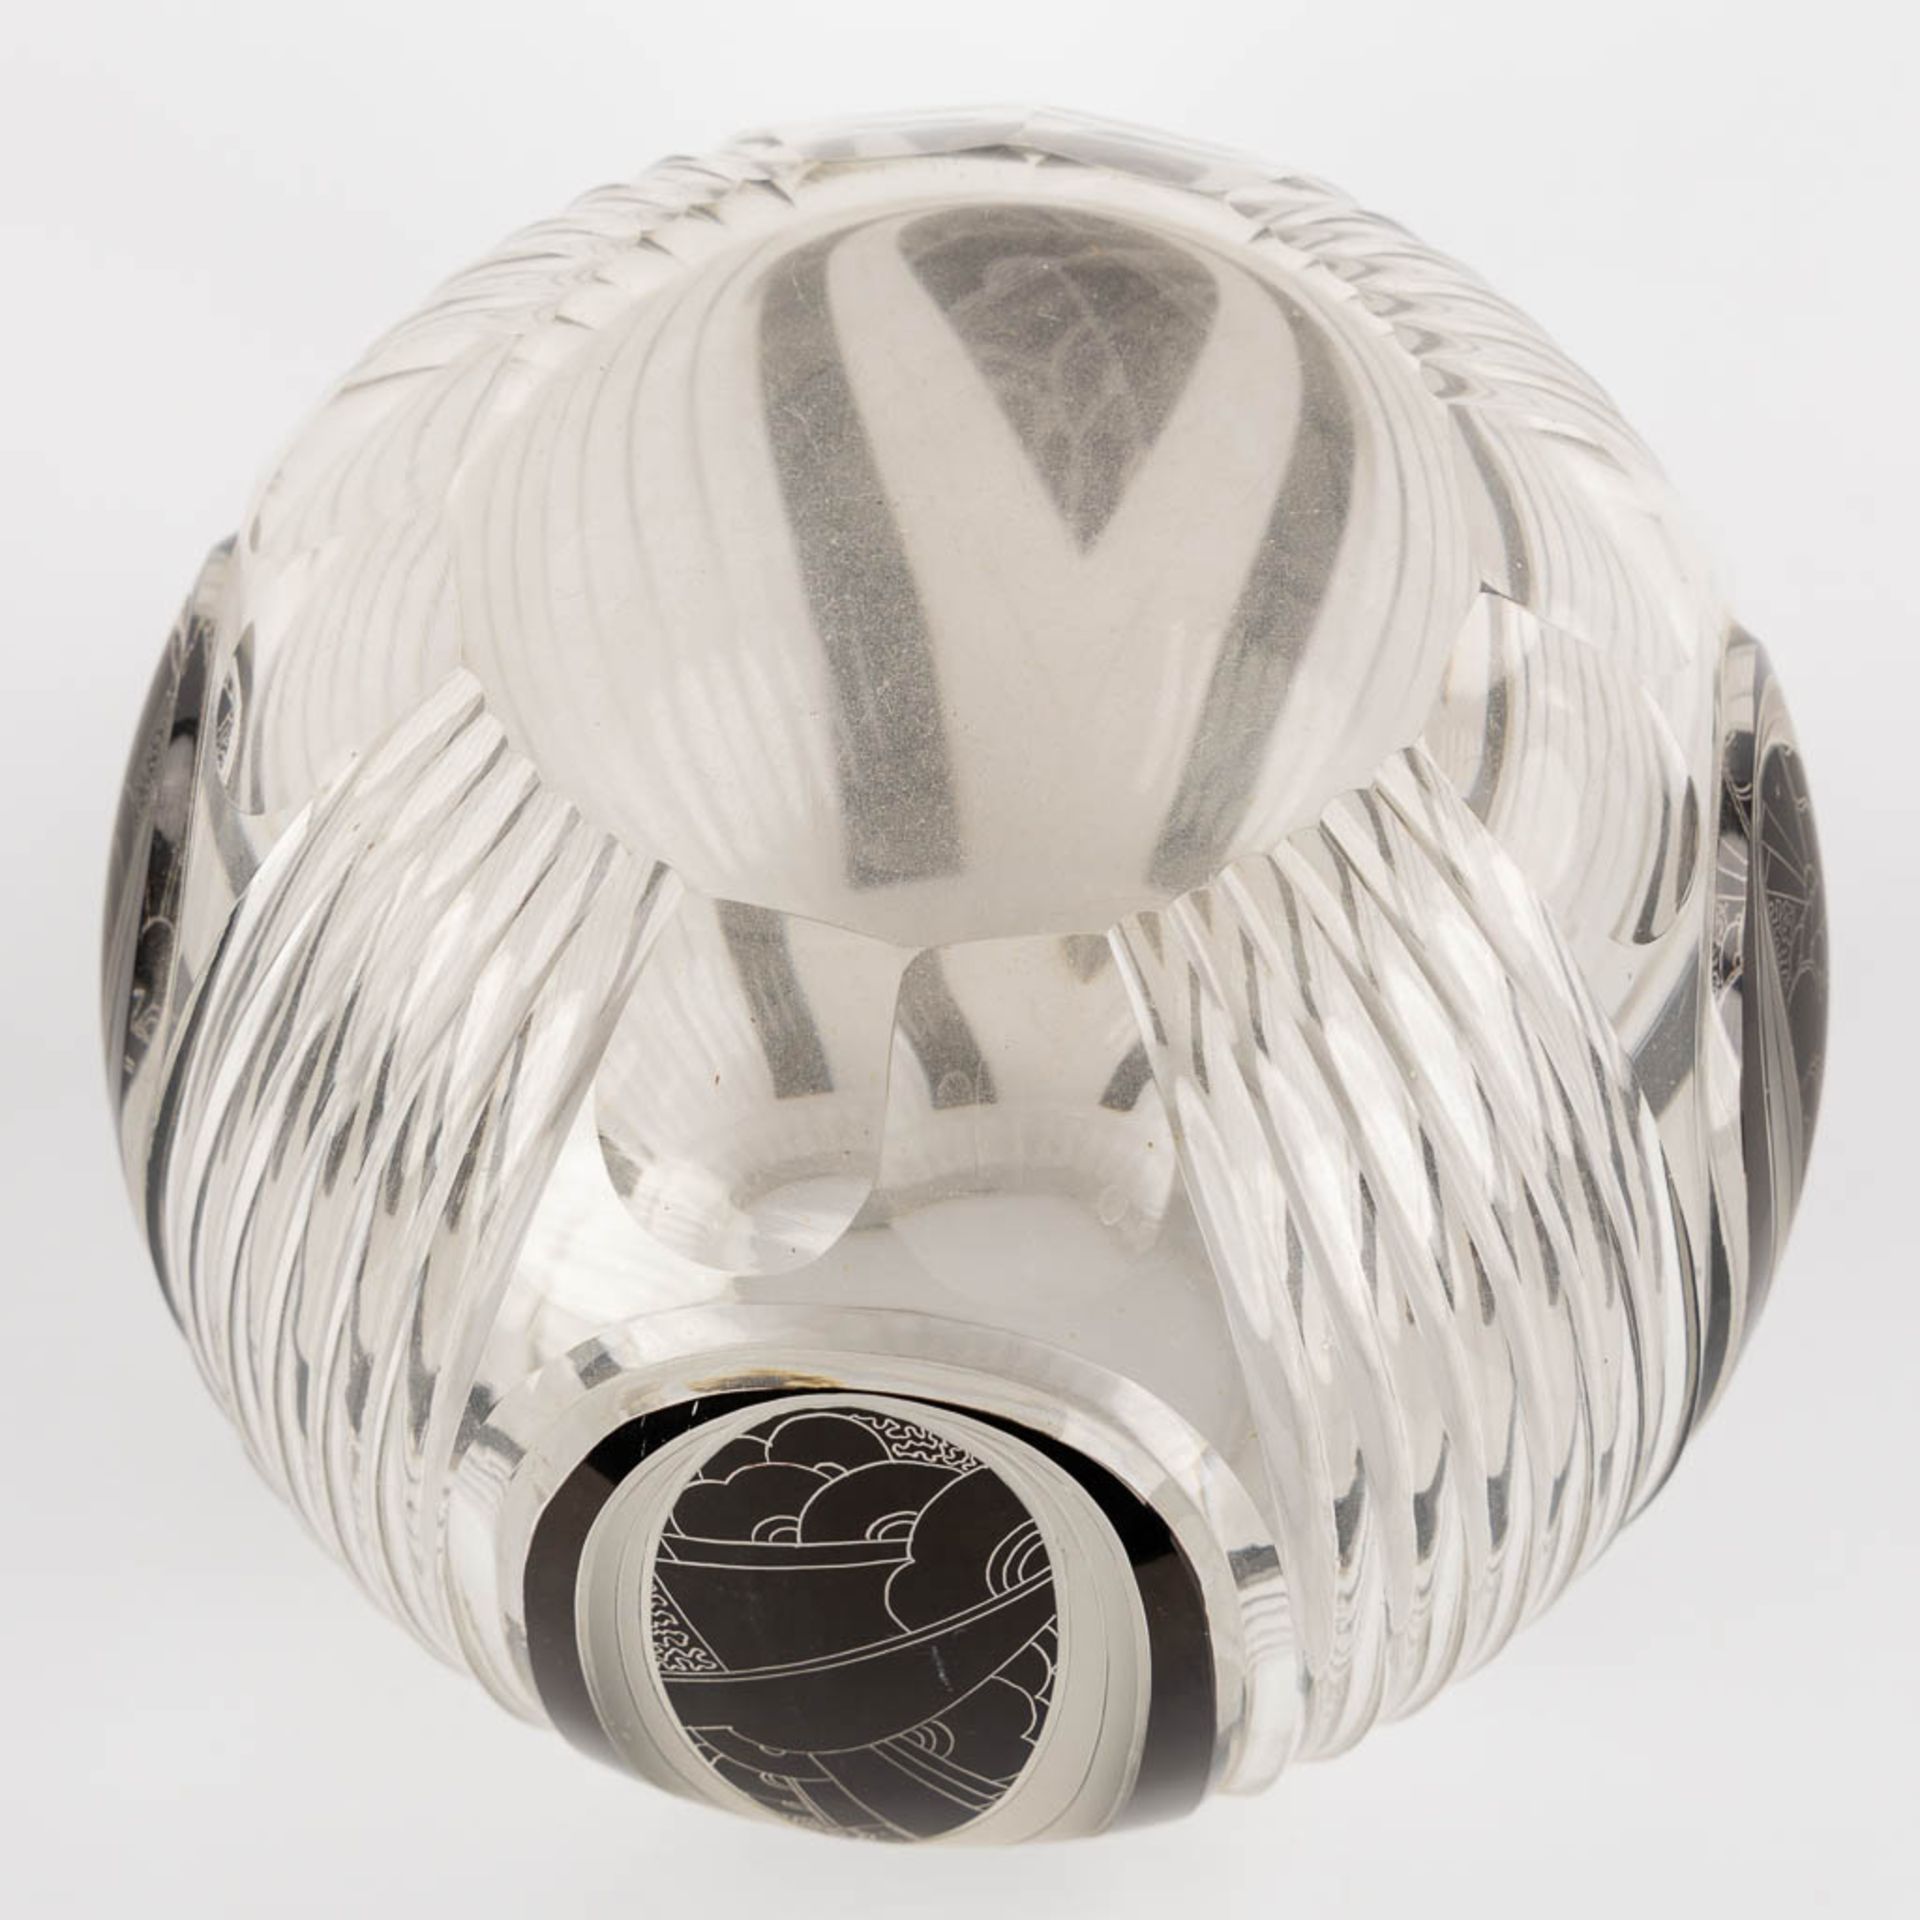 A round vase, glass in art deco style. (H:18 x D:18 cm) - Image 9 of 10